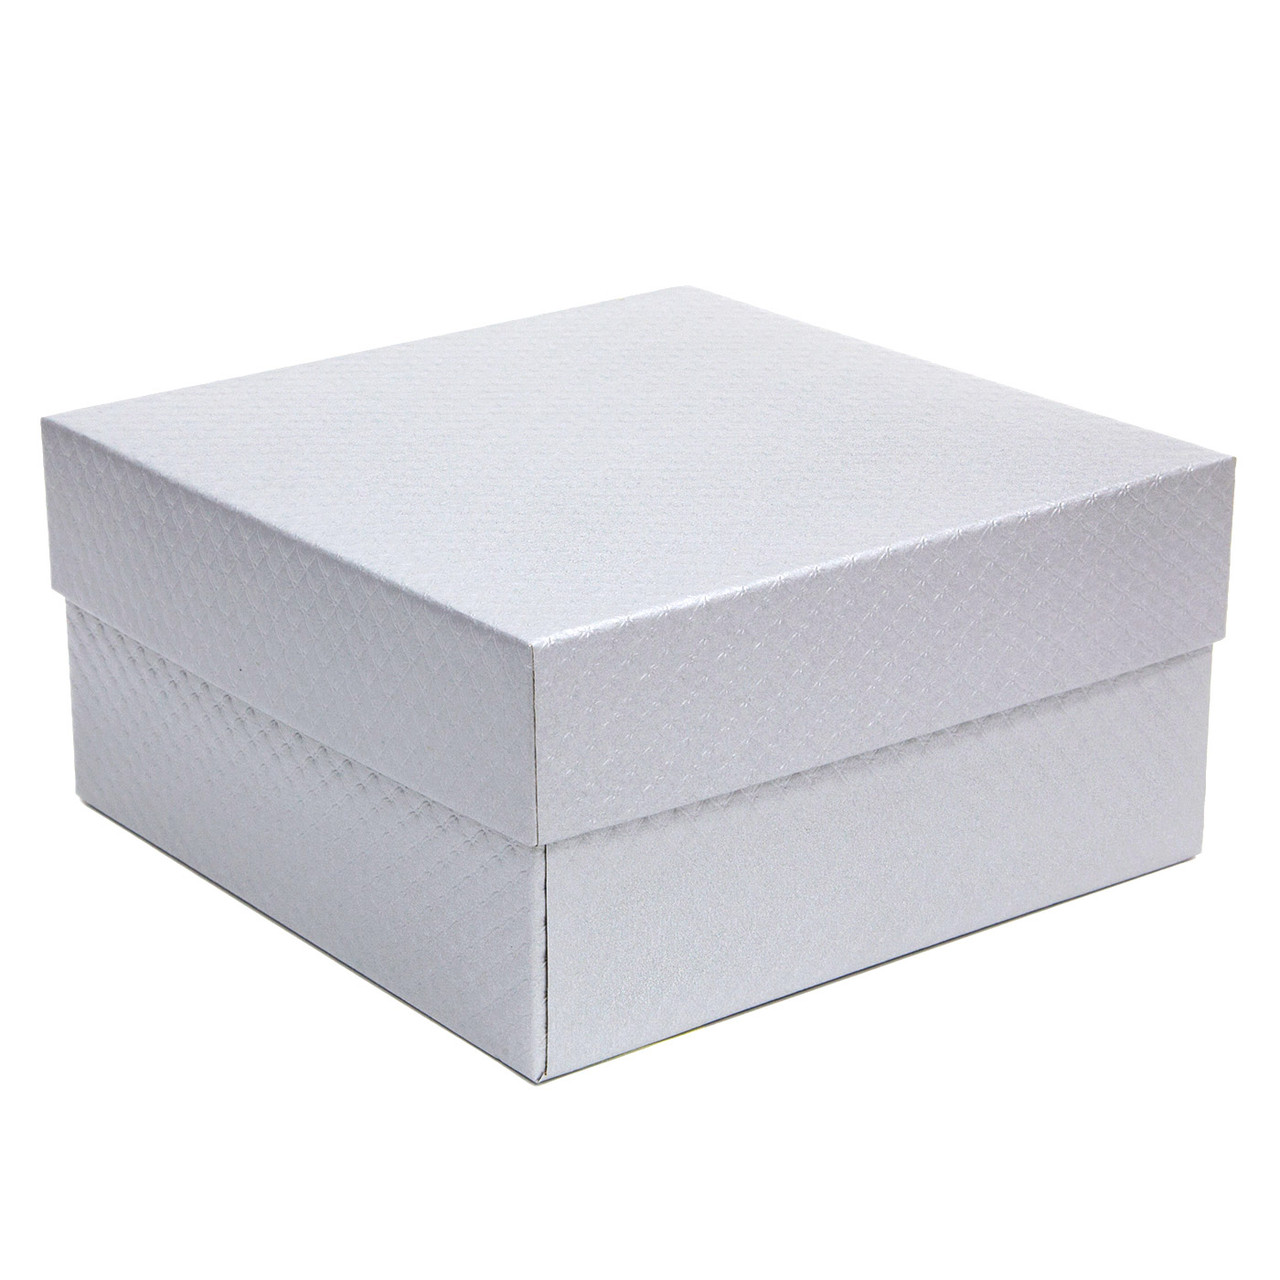 Silver Embossed Large Square Rigid Boxes 9"x9"x4-1/2"